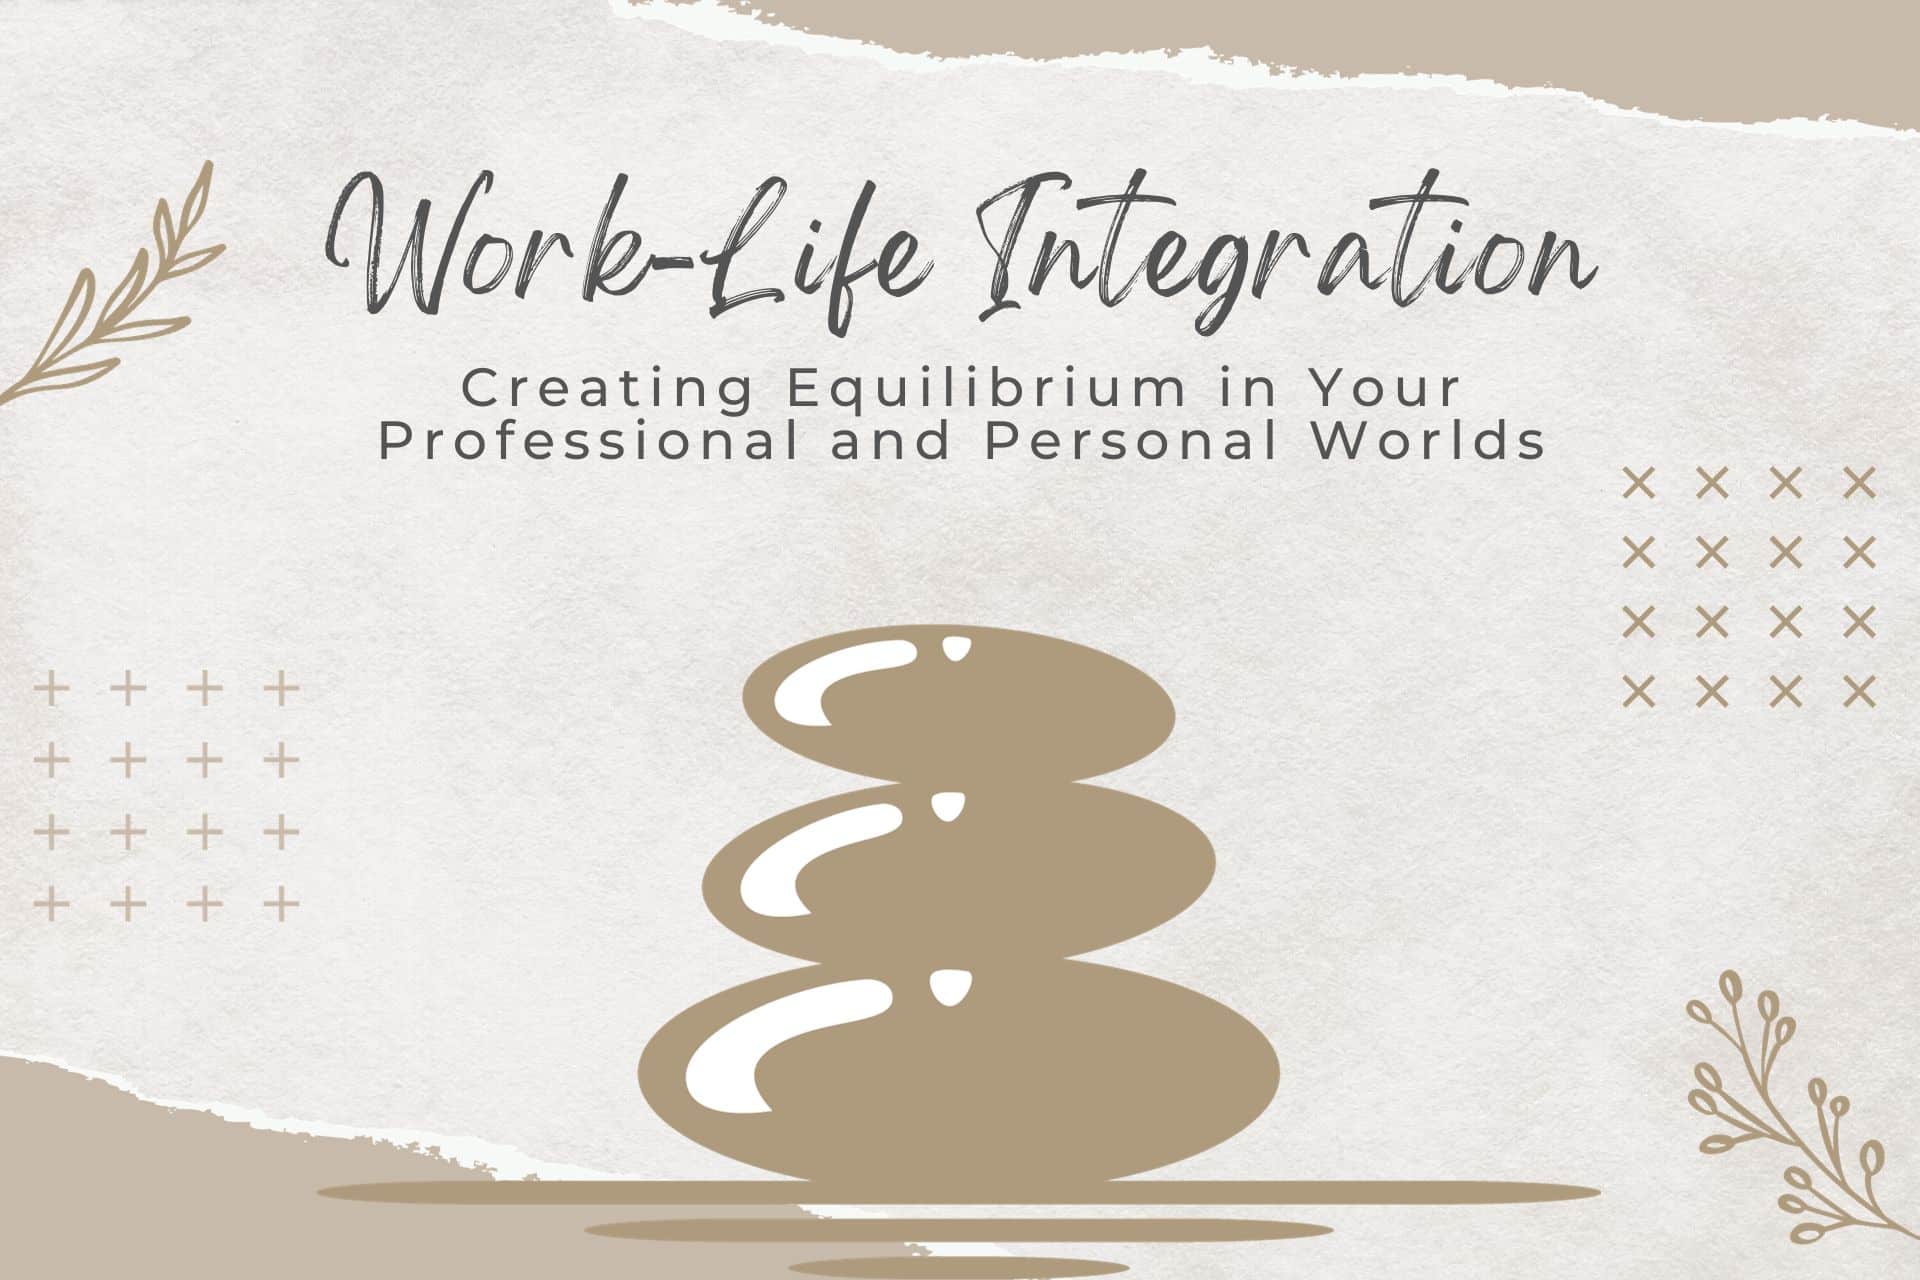 work-life integration articles for women